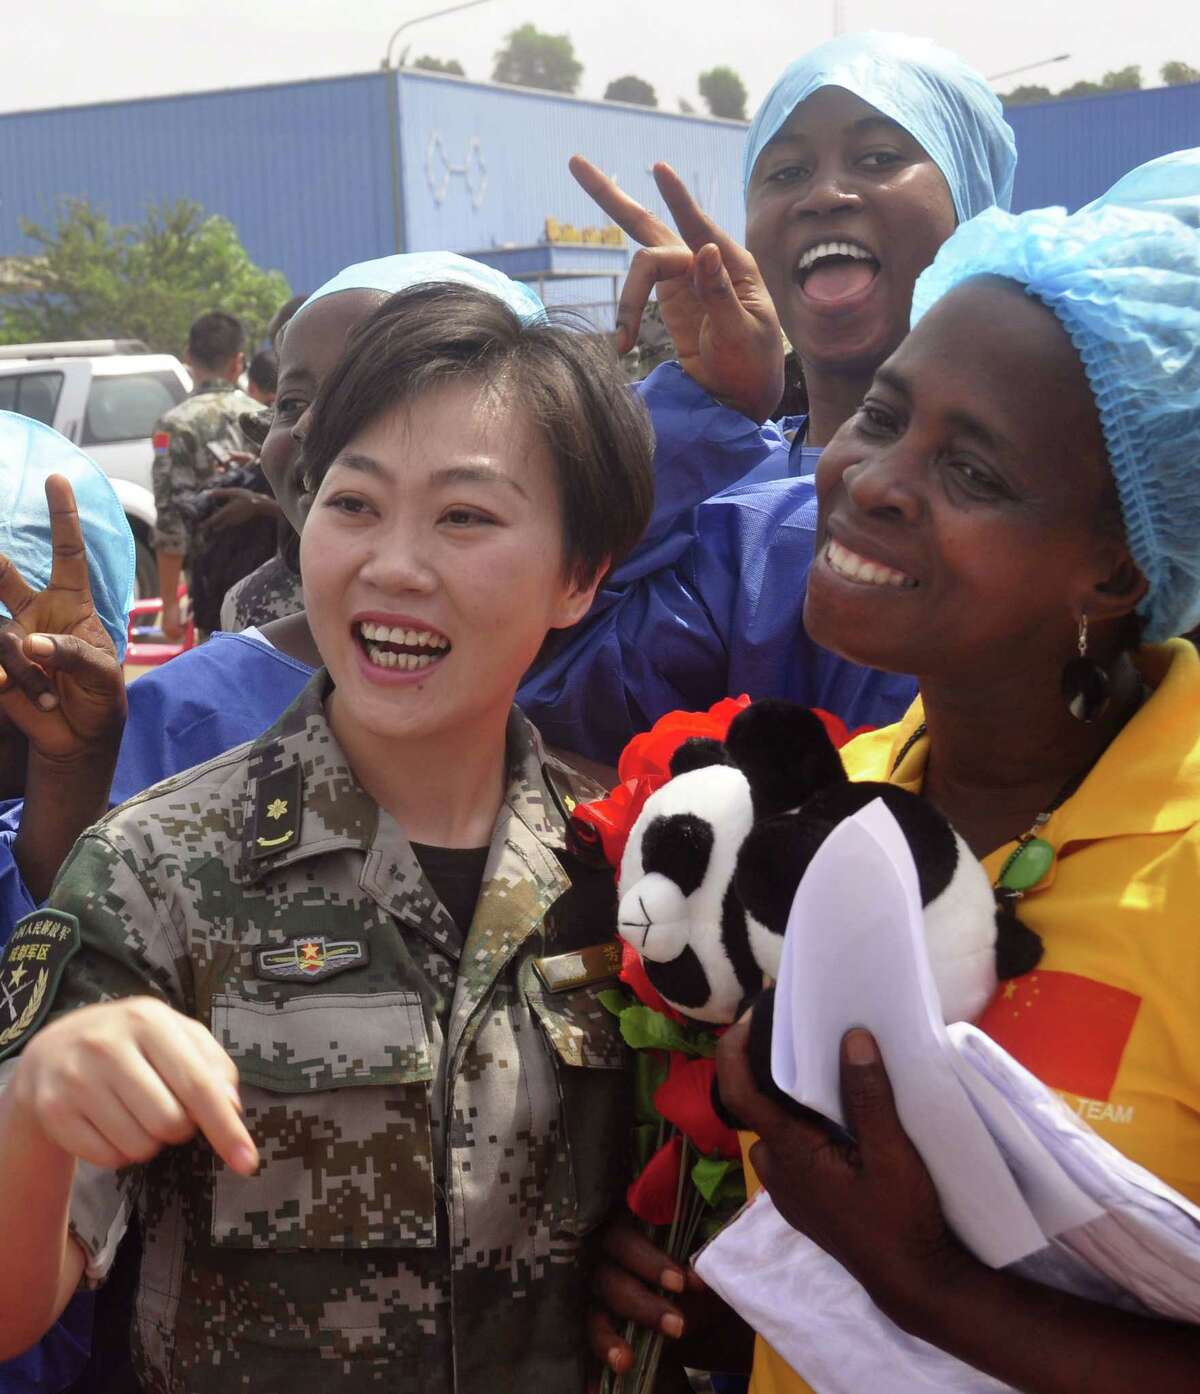 Ebola patient Beatrice Yardolo, right, celebrate with a Chinese military health workers and others as she leaves the Chinese Ebola treatment center were she was treated for the Ebola virus infection outskirts of Monrovia, Liberia, Thursday, March 5, 2015. Liberia released its last Ebola patient, a 58-year old English teacher, from a treatment center in the capital on Thursday, beginning its countdown to being declared Ebola free. 'I am one of the happiest human beings today on earth because it was not easy going through this situation and coming out alive,' Beatrice Yardolo told The Associated Press after her release. She kept thanking God and the health workers at the center.(AP Photo/ Abbas Dulleh)